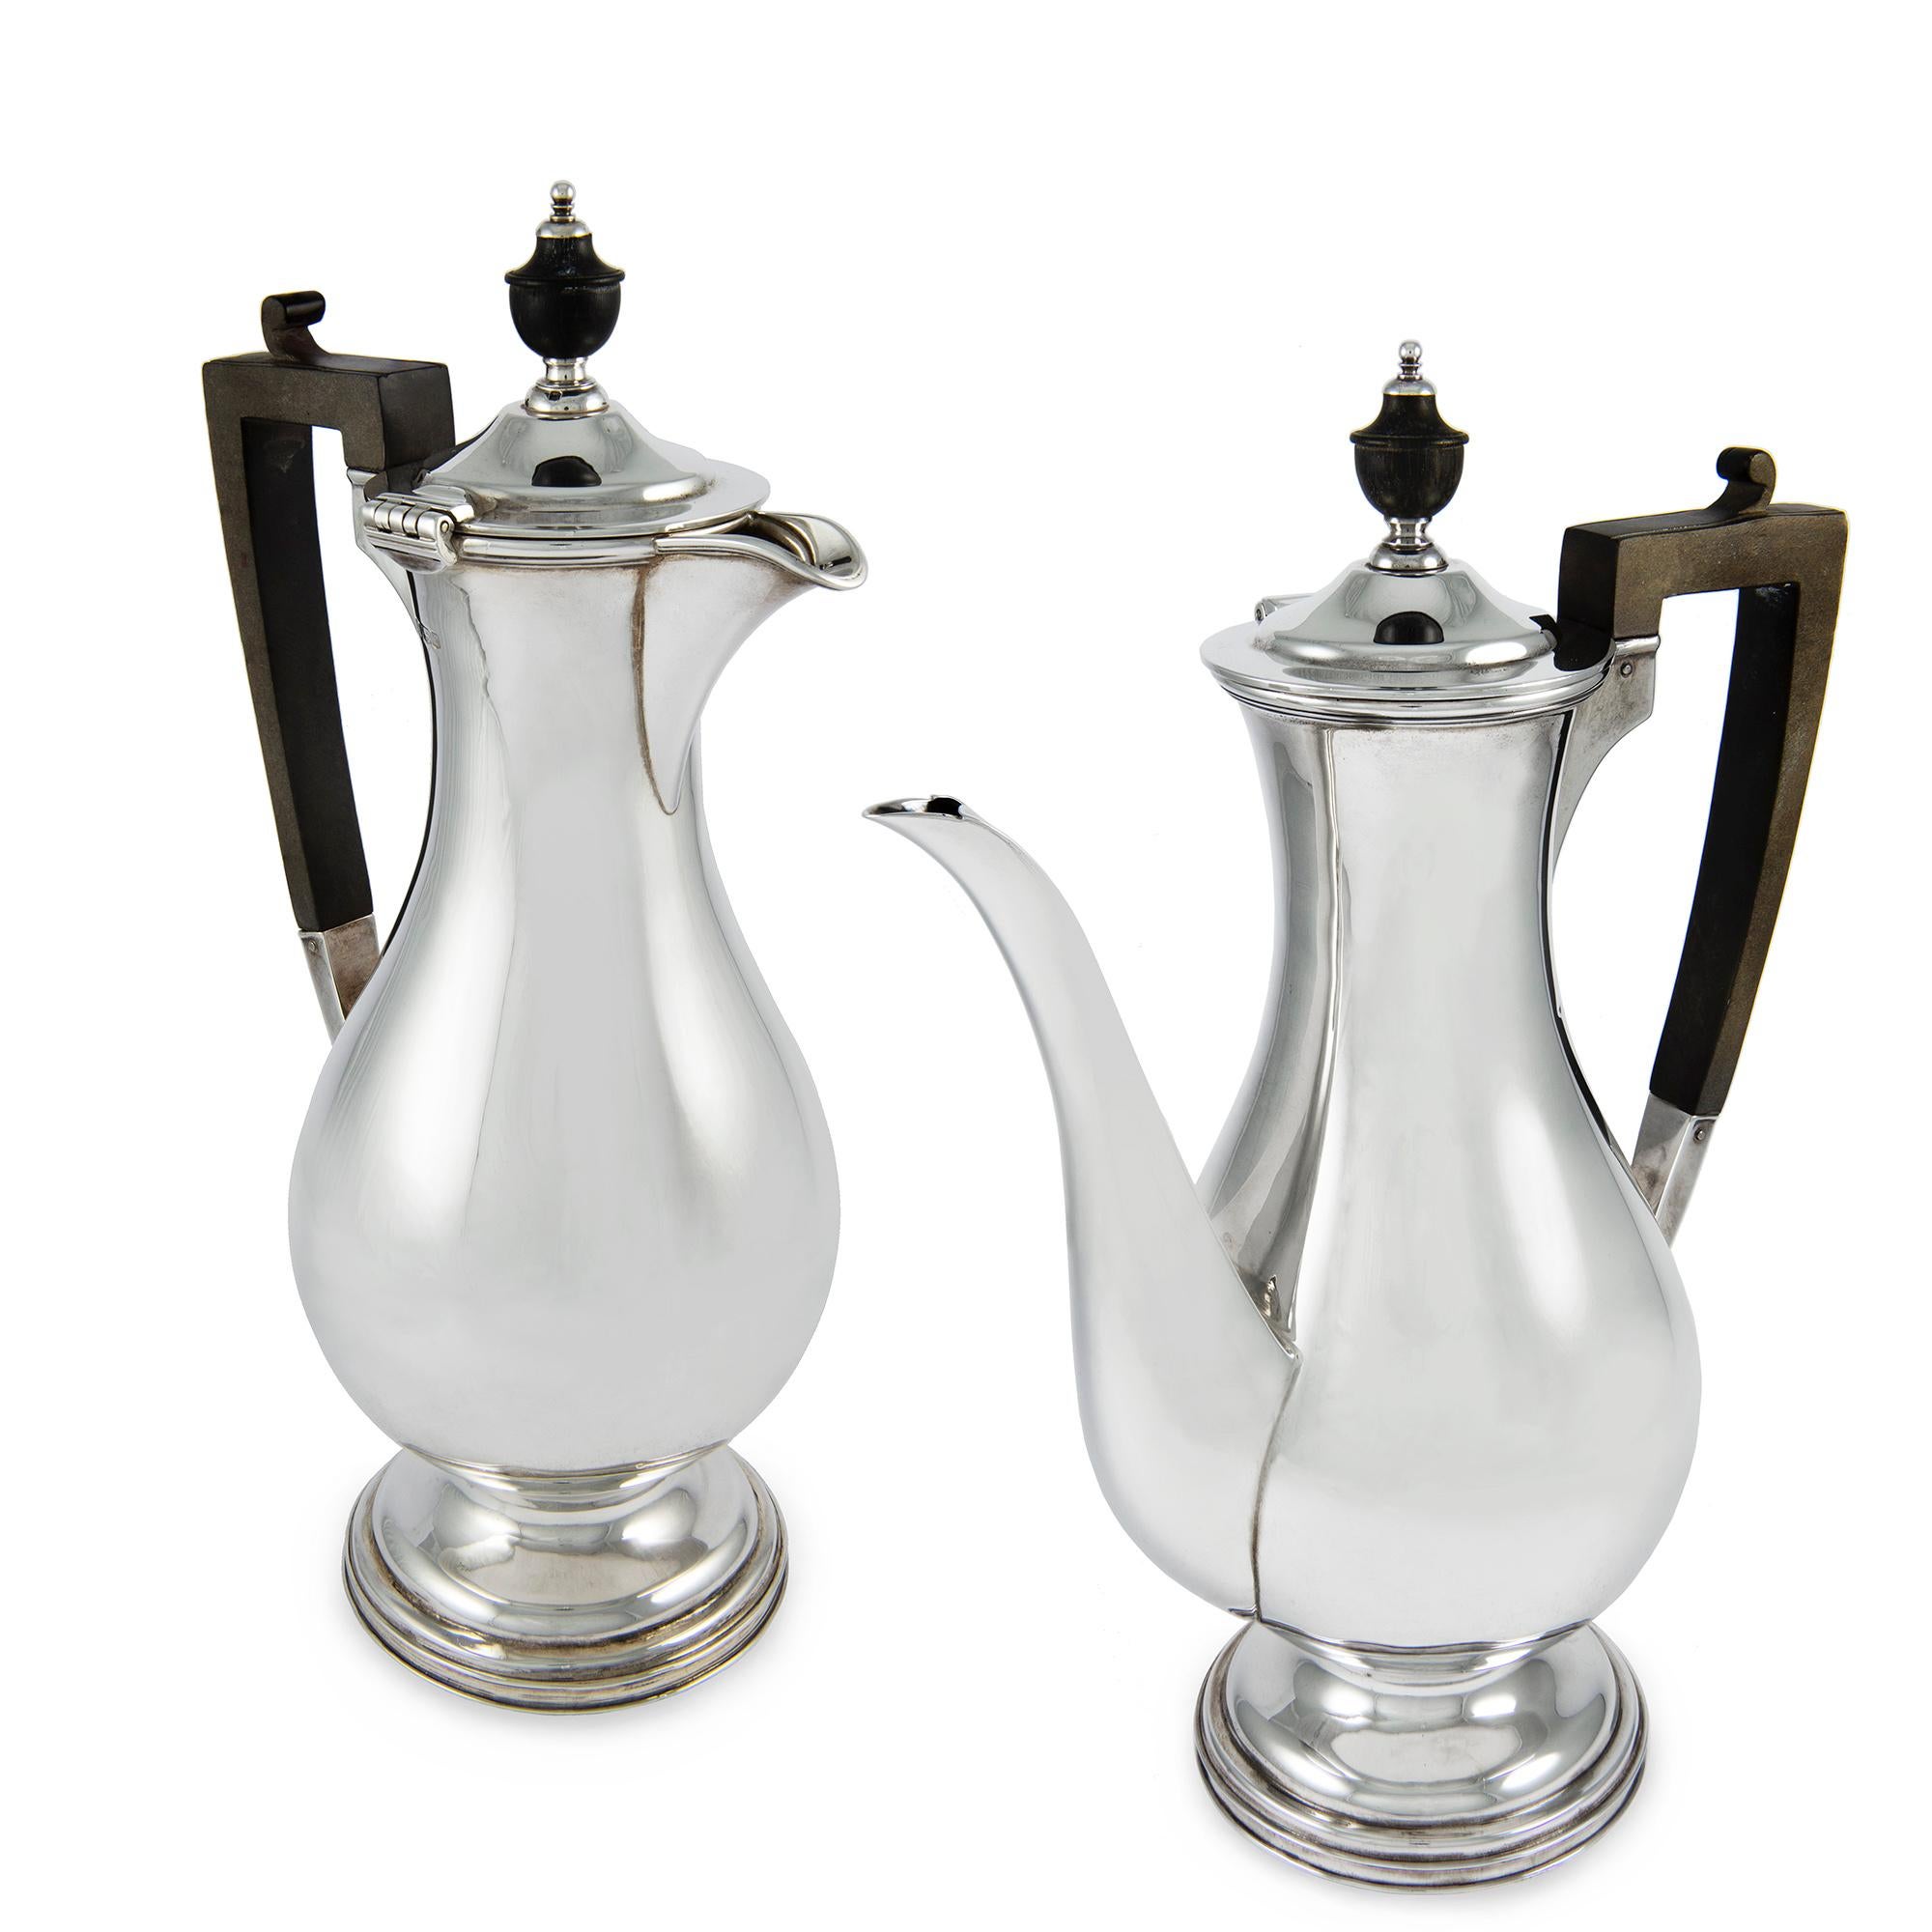 Matching sterling silver baluster shape coffee and hot water pots, with ebonised handles and finials,  hallmarked Sheffield 1923, maker G&S Co LTD, measuring approximately 28cm in height, 31ozs total weight.

Should you choose to make this purchase